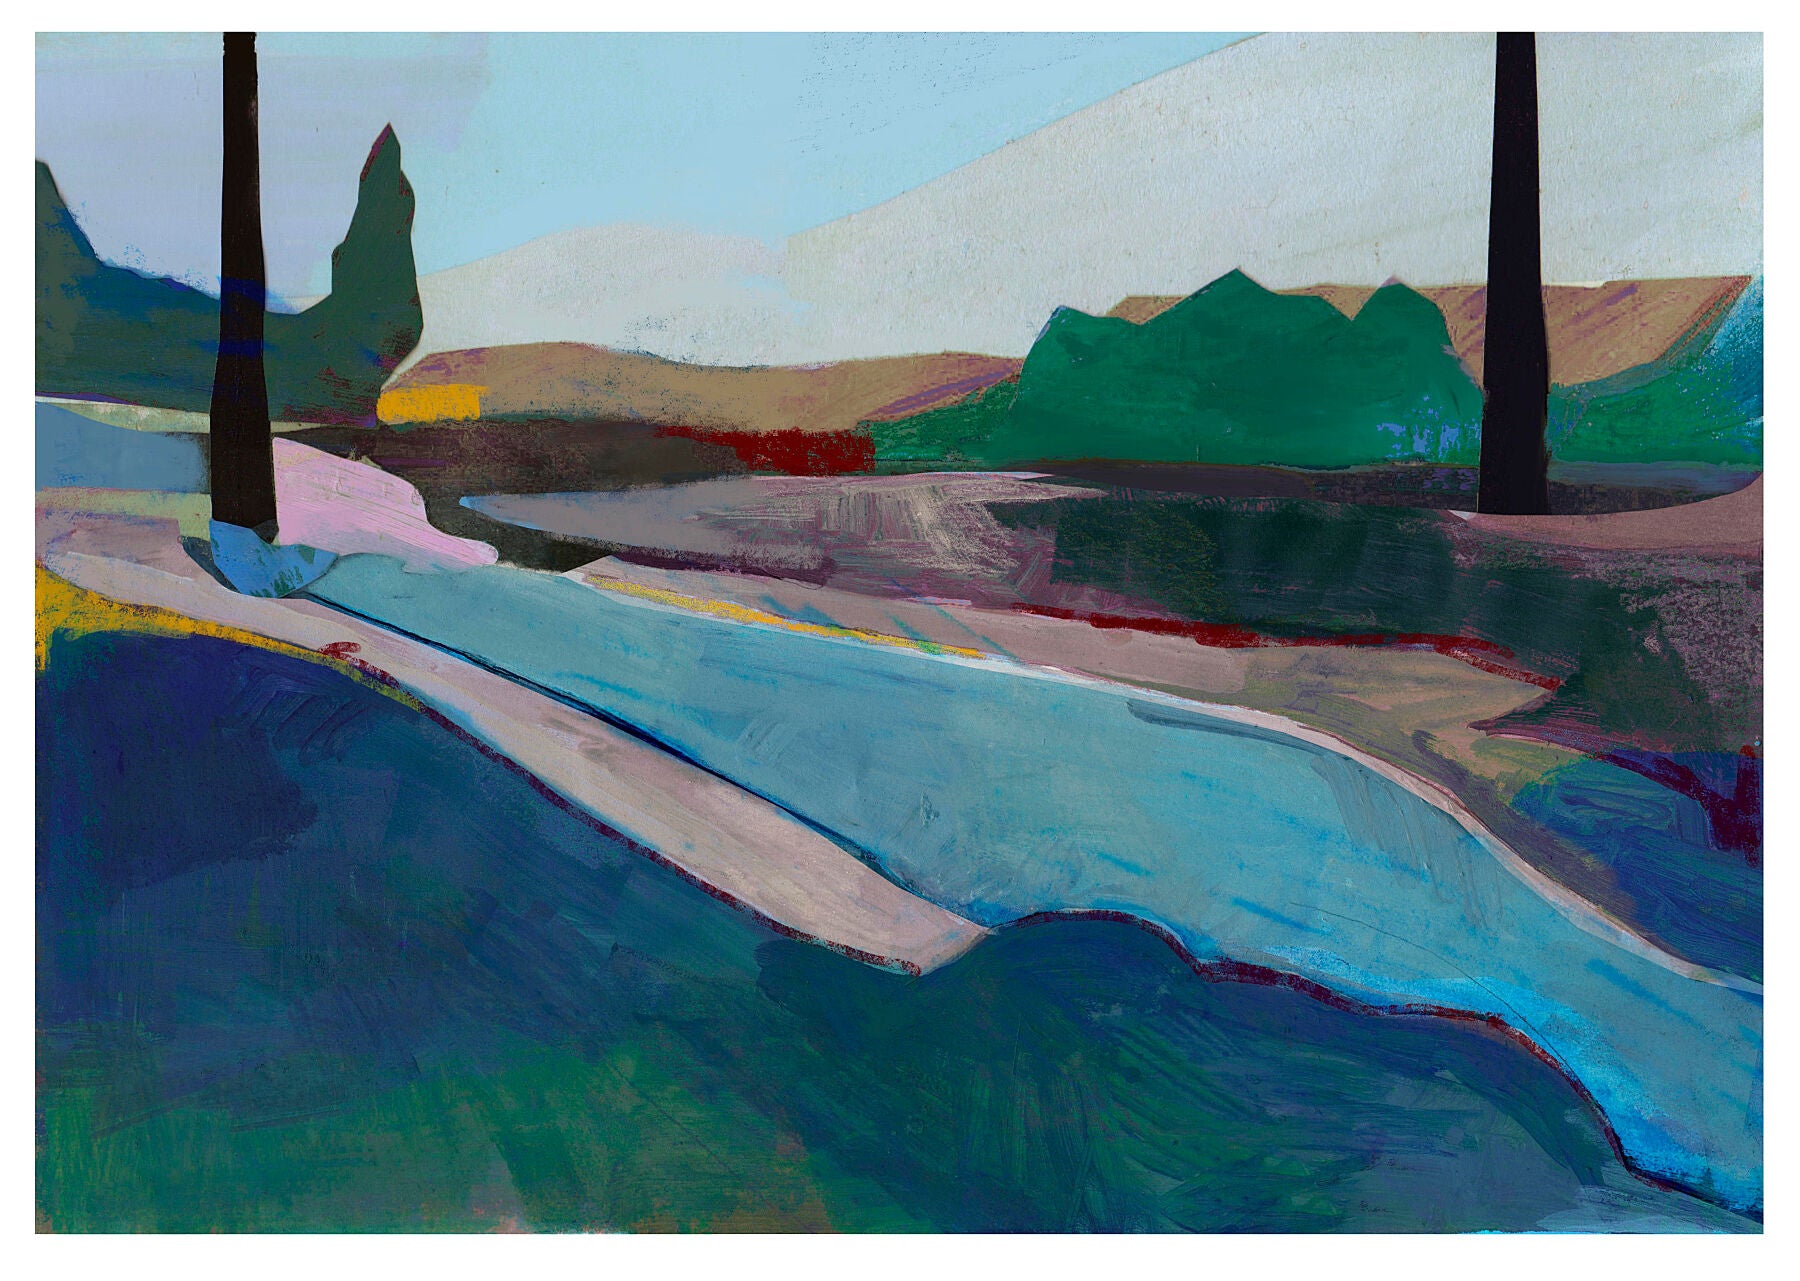 Immerse yourself in 'Hitchin Brook' by David McConochie: a mesmerising unframed print of an abstract rural landscape. Shades of blue paint a serene countryside scene with a solitary river winding between two tree silhouettes. This tranquil artwork invites you to escape into nature's beauty